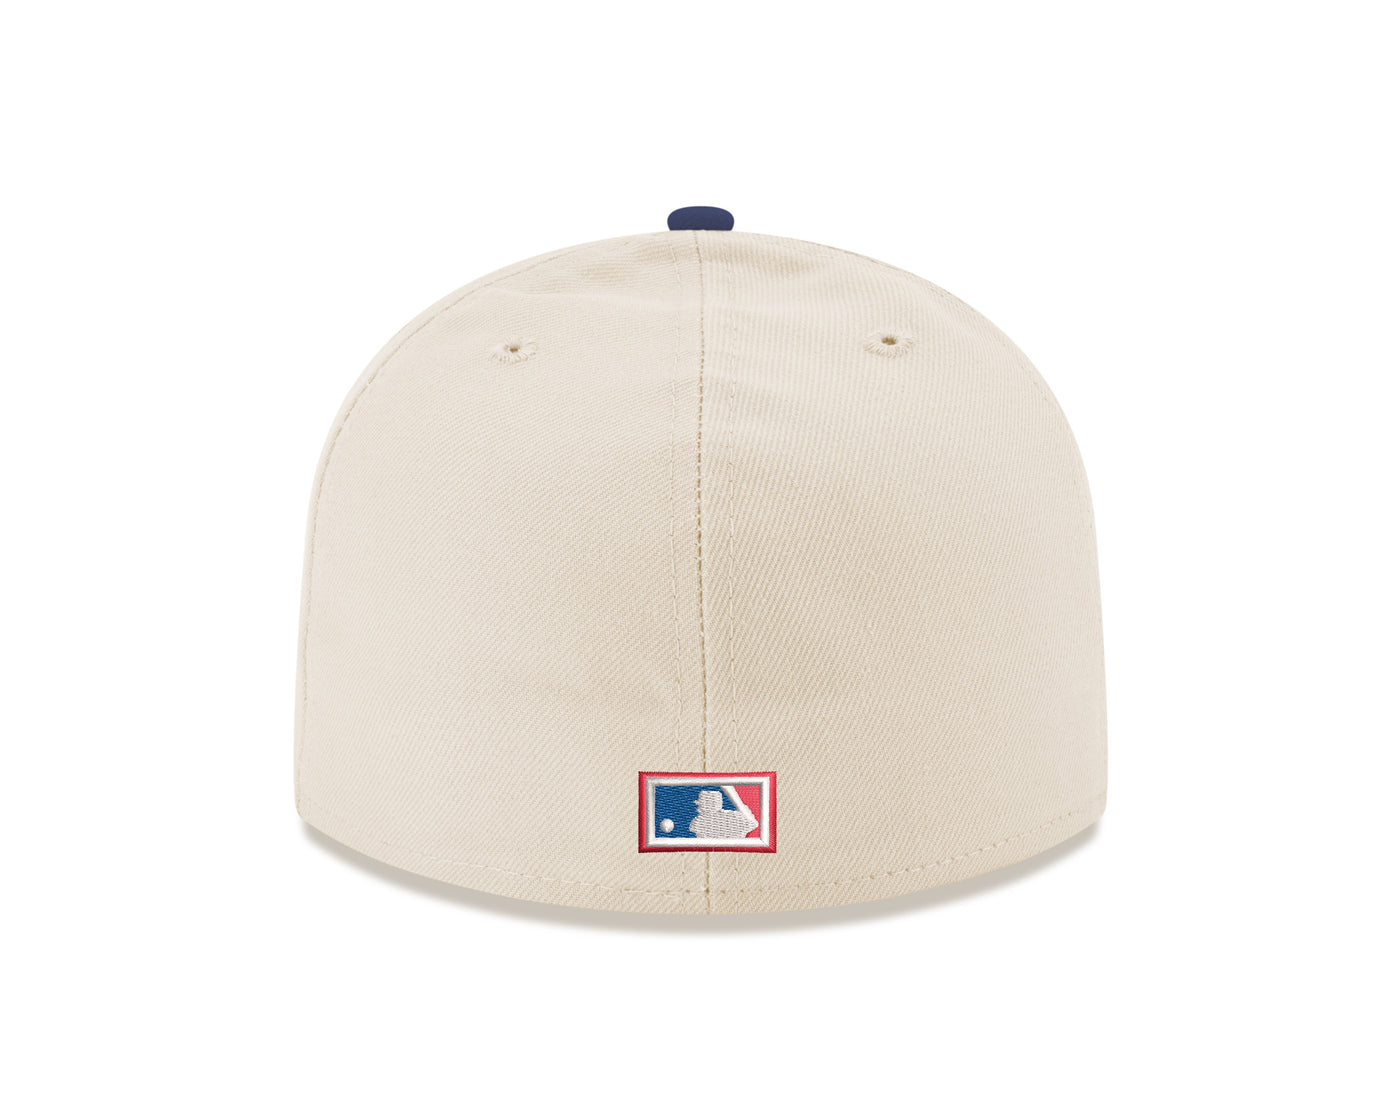 CHICAGO CUBS FIELD OF DREAMS CREAM AND NAVY FITTED CAP